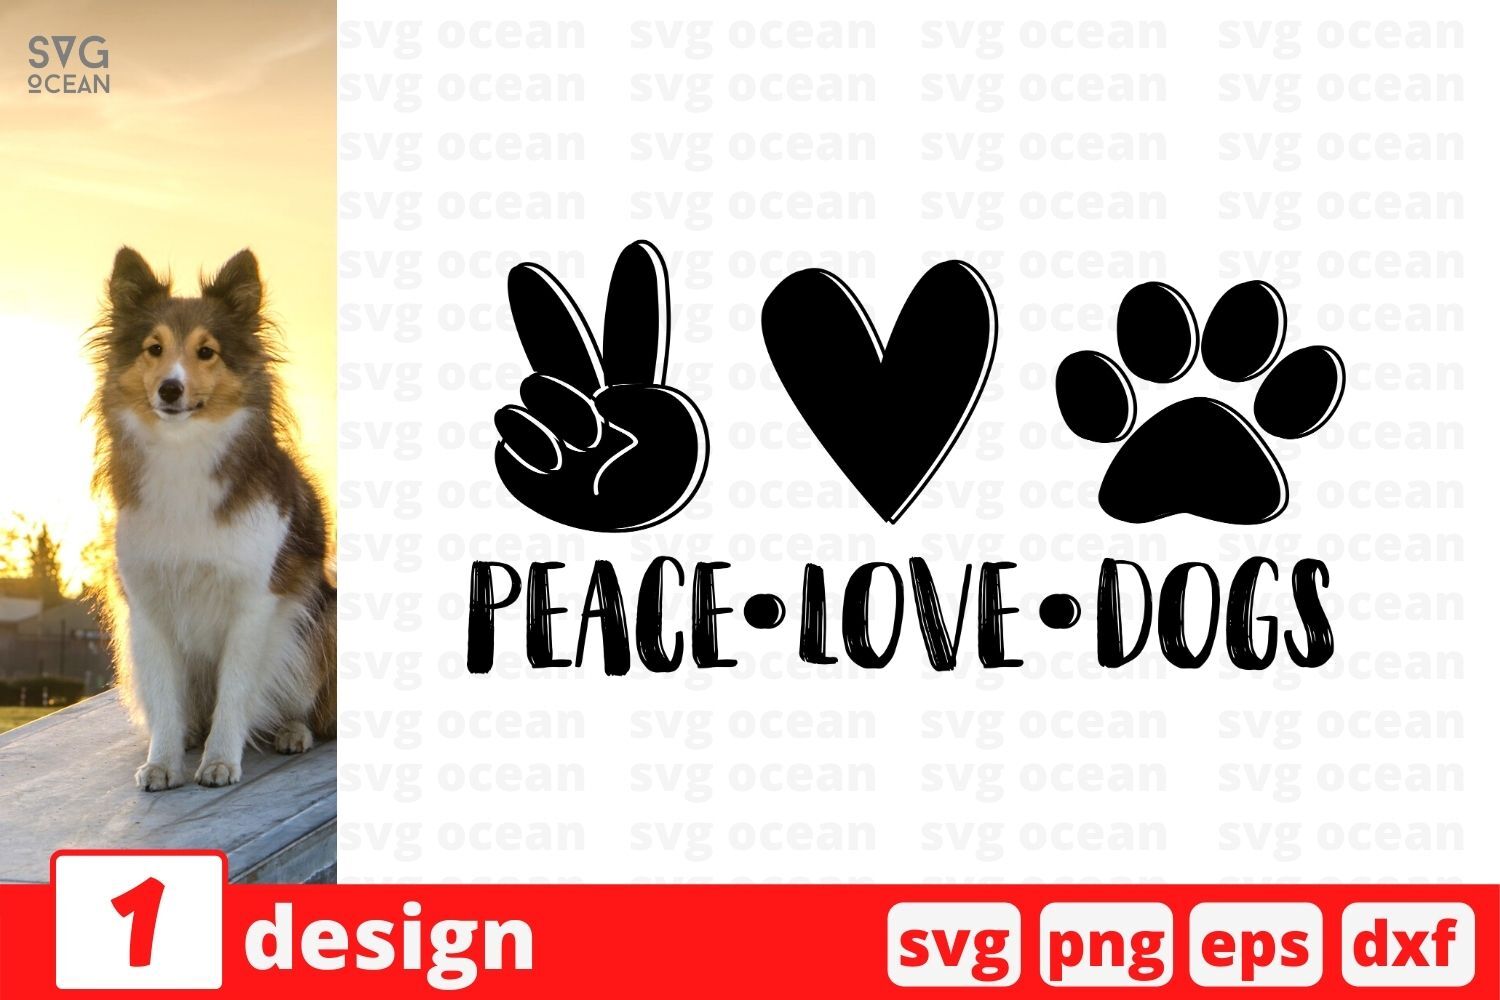 Download Peace Love Dogs Svg Cut File By Svgocean Thehungryjpeg Com